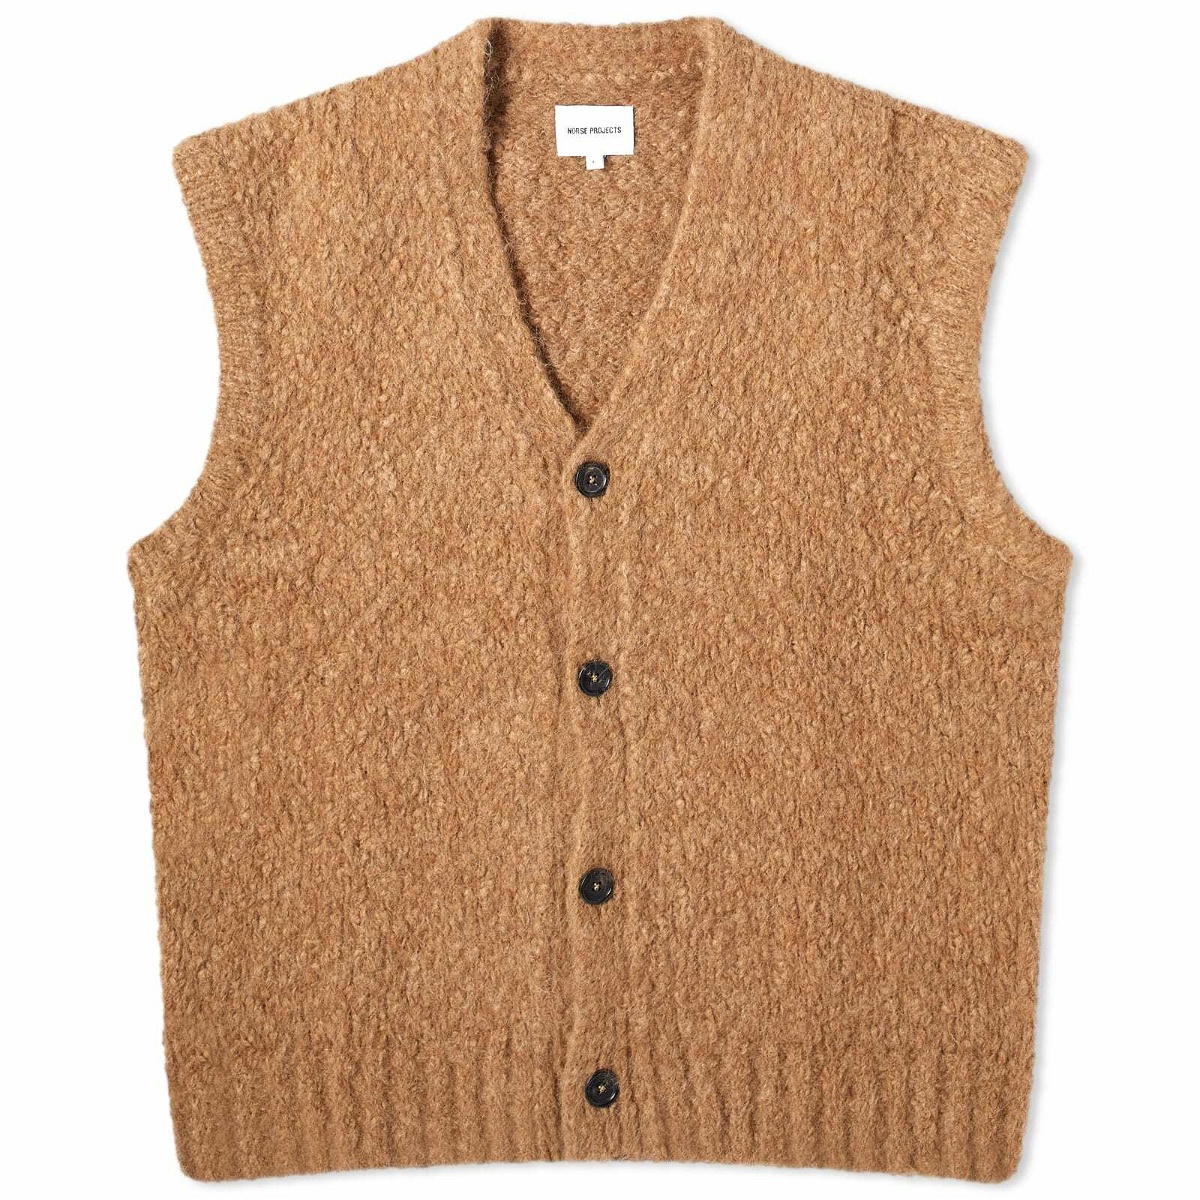 Norse Projects Men's August Flame Alpaca Cardigan Vest in Camel Norse ...